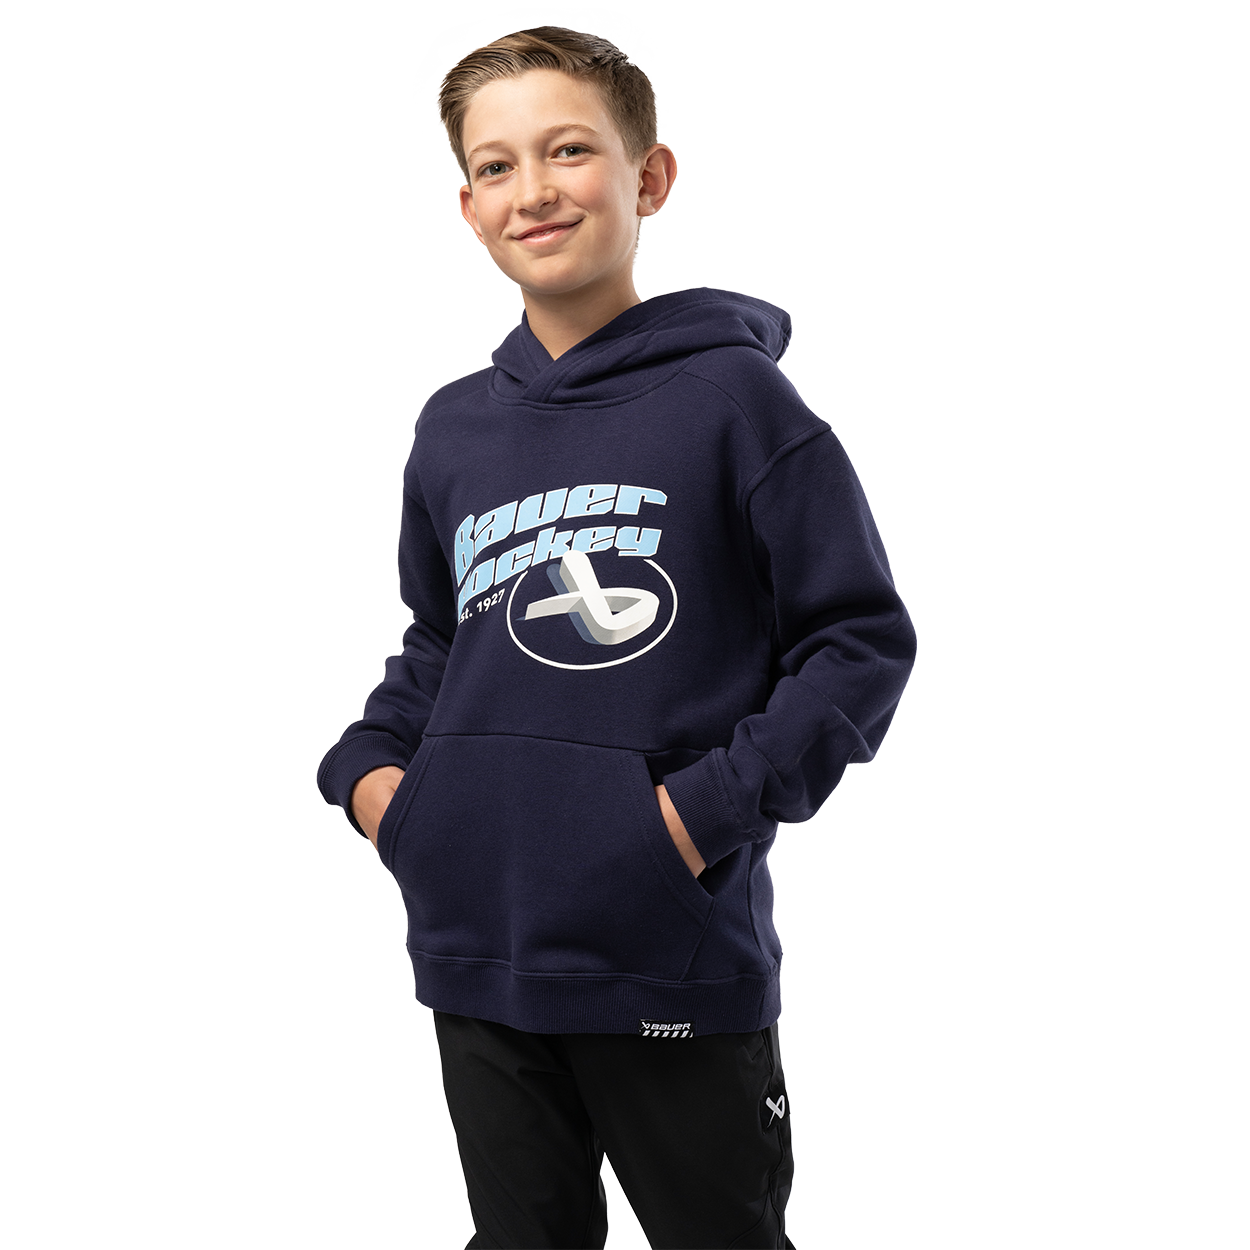 BAUER ECLIPSE HOODIE YOUTH